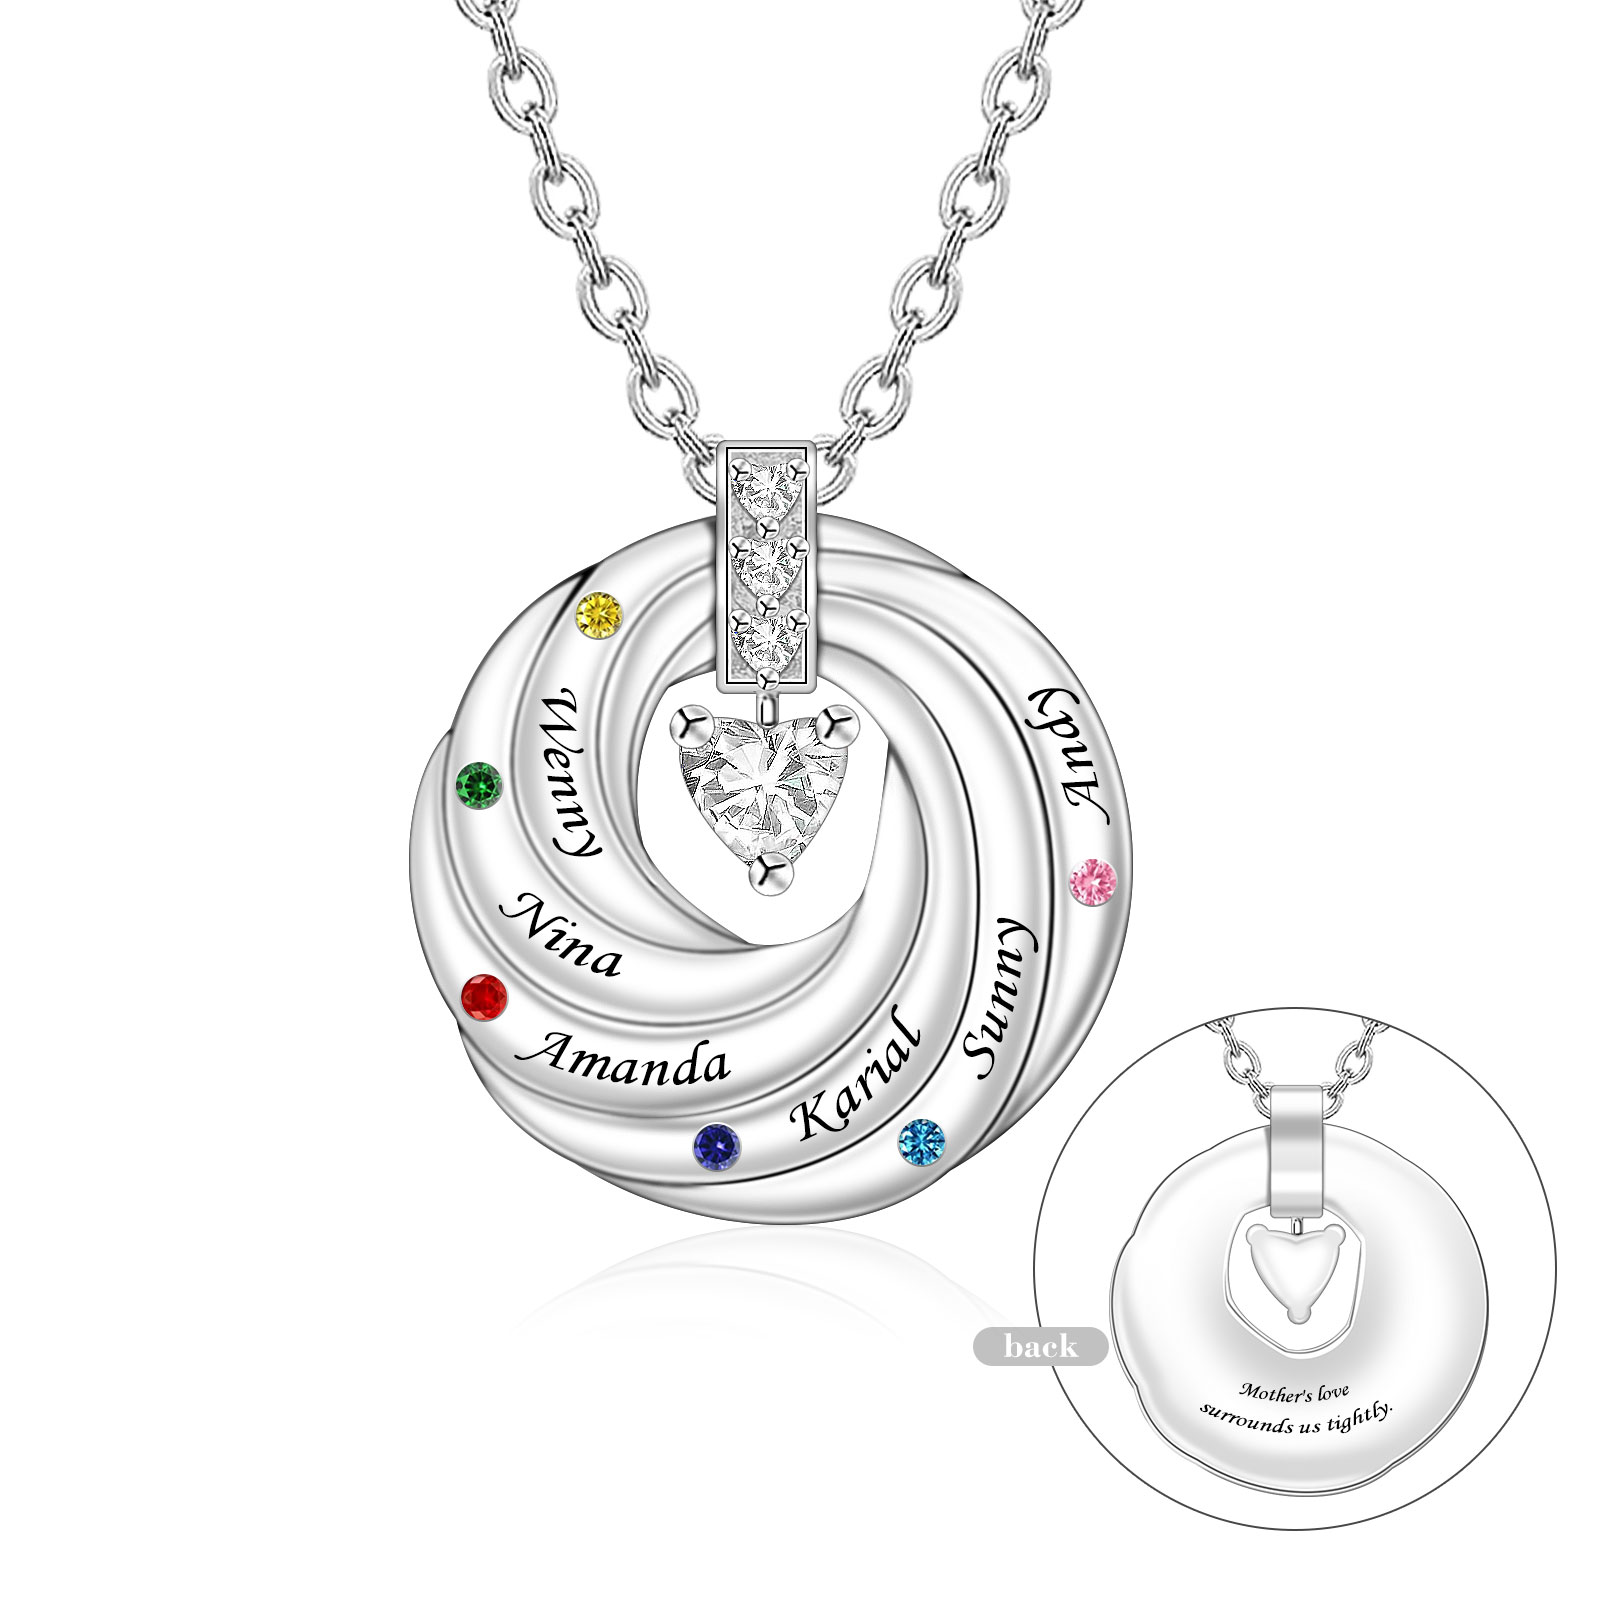 NL13-1 Personalized Family Tree Necklace with Birthstones and Engraved Names